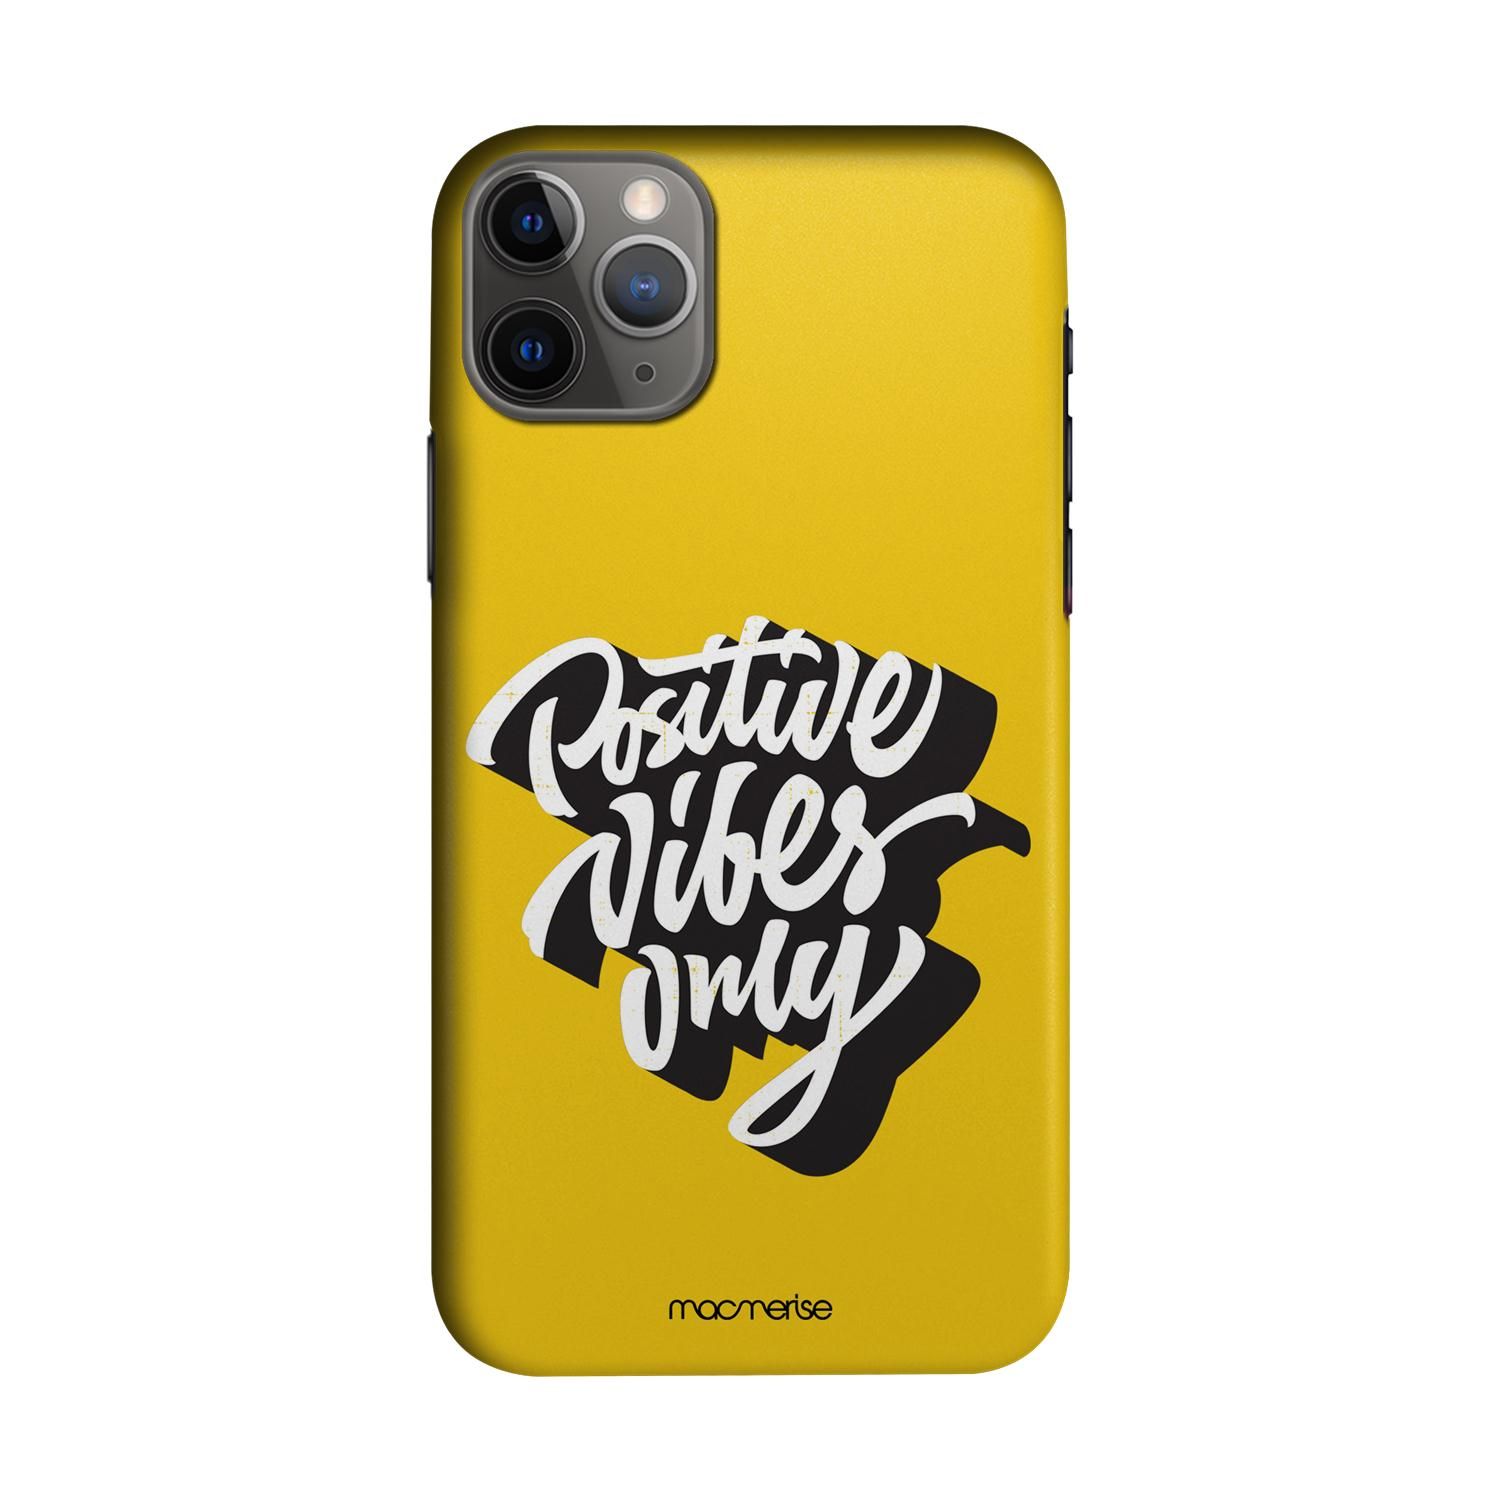 Buy Positive Vibes only - Sleek Phone Case for iPhone 11 Pro Max Online